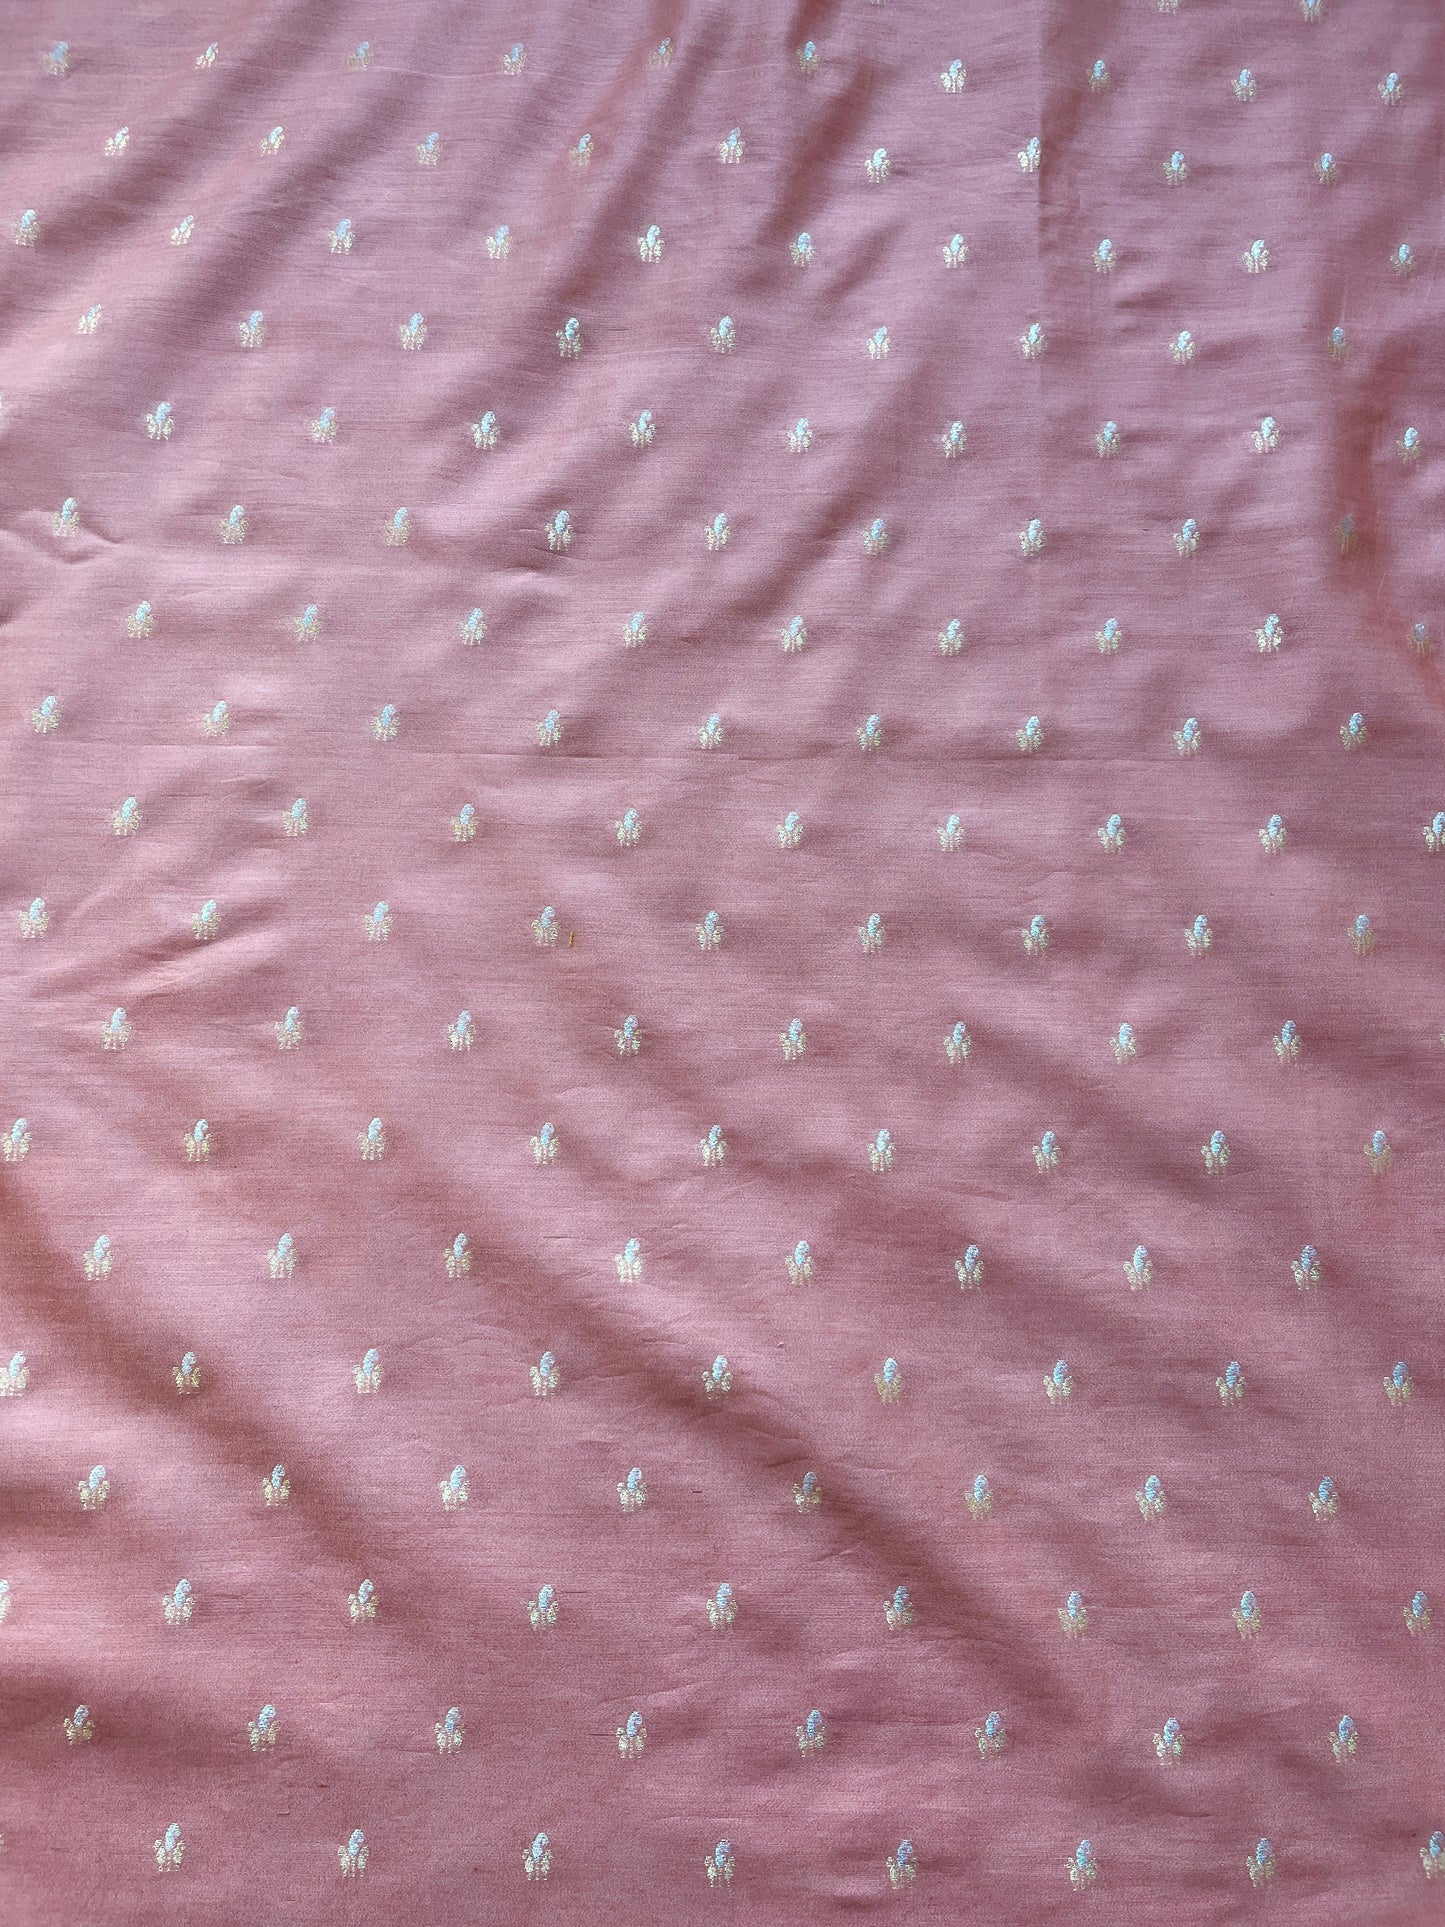 Mulberry Silk Dusty Pink Fabric